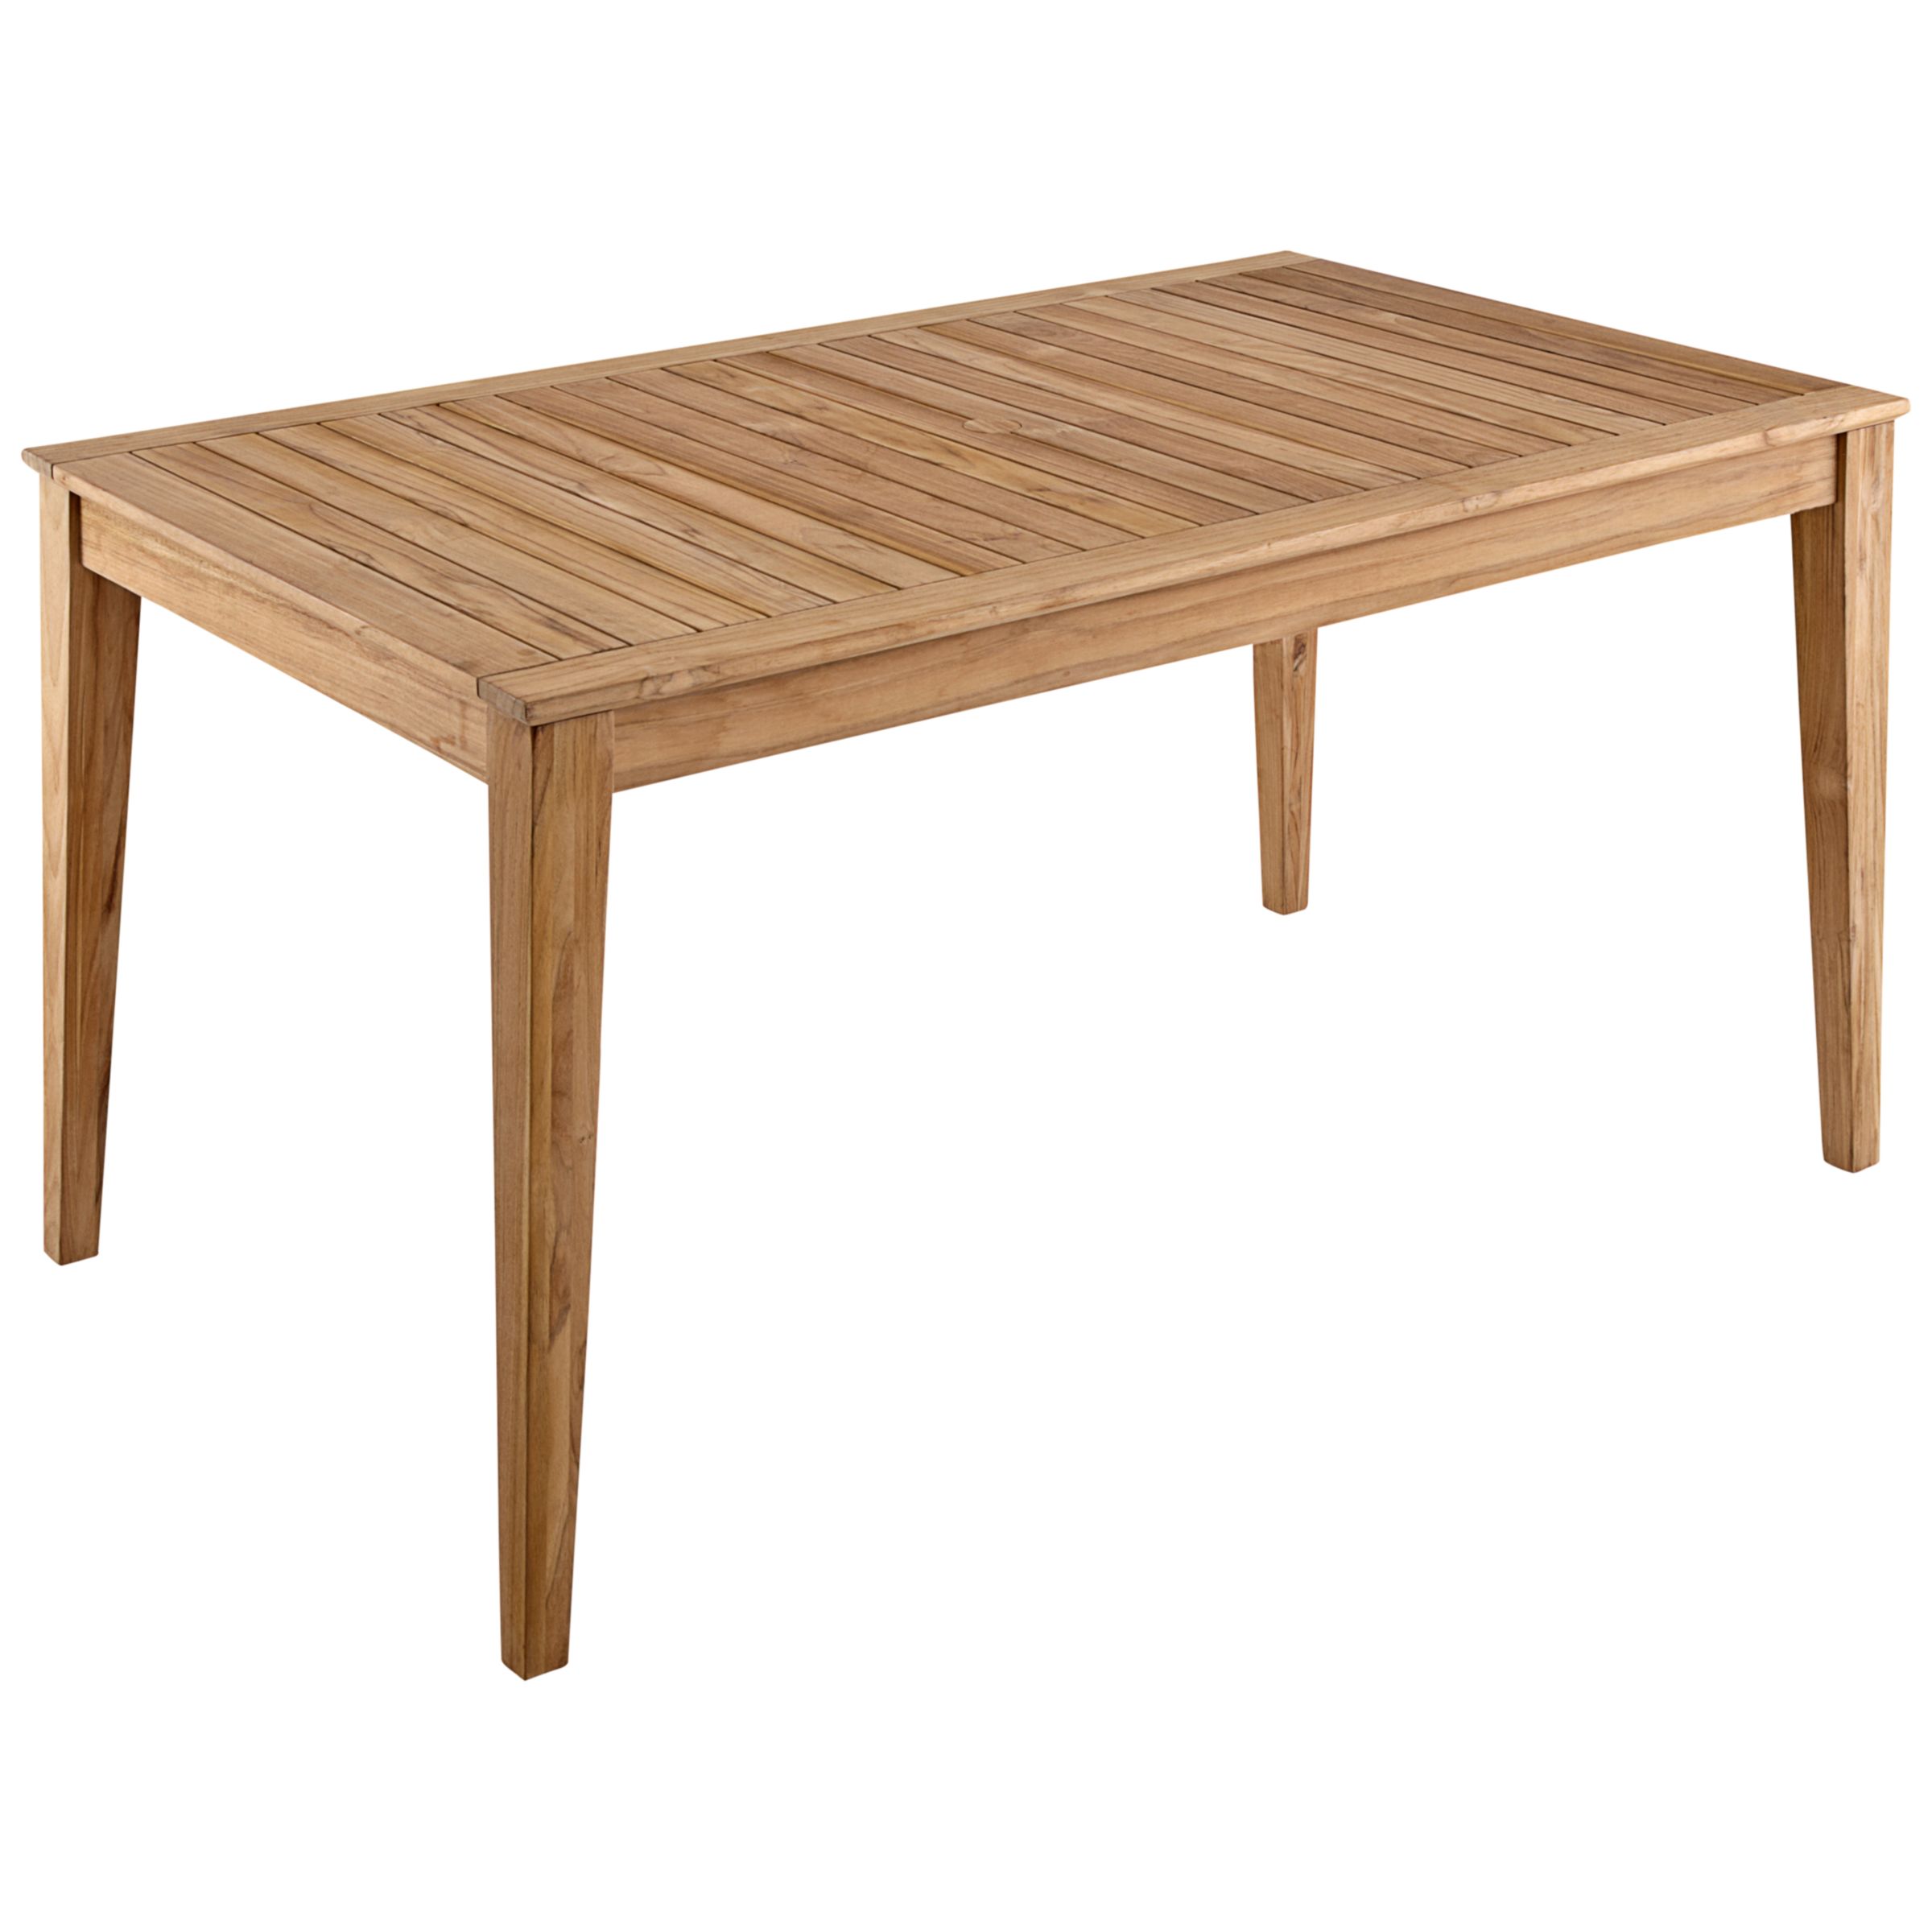 John Lewis Leckford 6 Seater Outdoor Dining Table